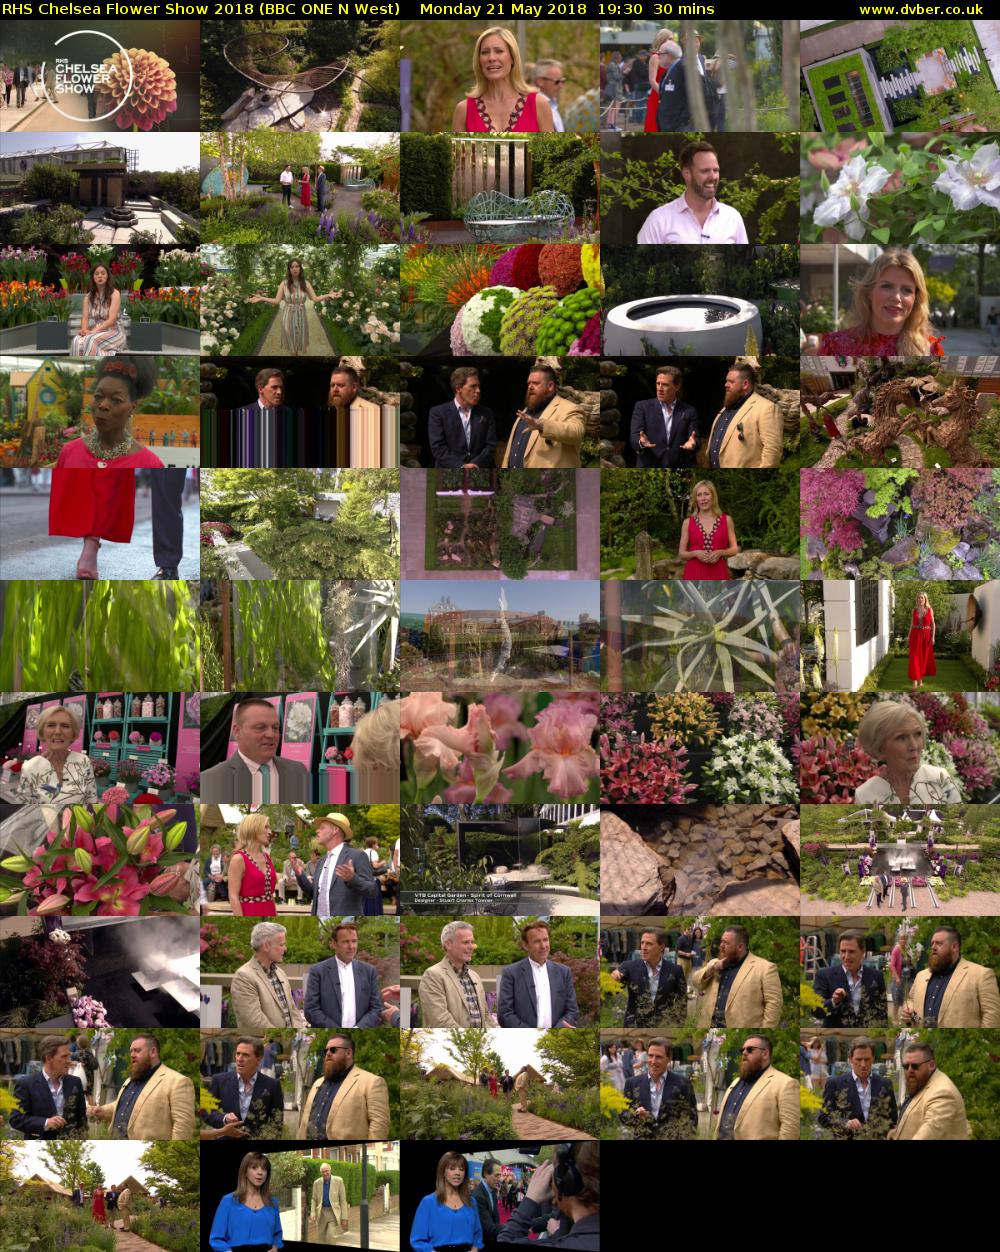 RHS Chelsea Flower Show 2018 (BBC ONE N West) Monday 21 May 2018 19:30 - 20:00